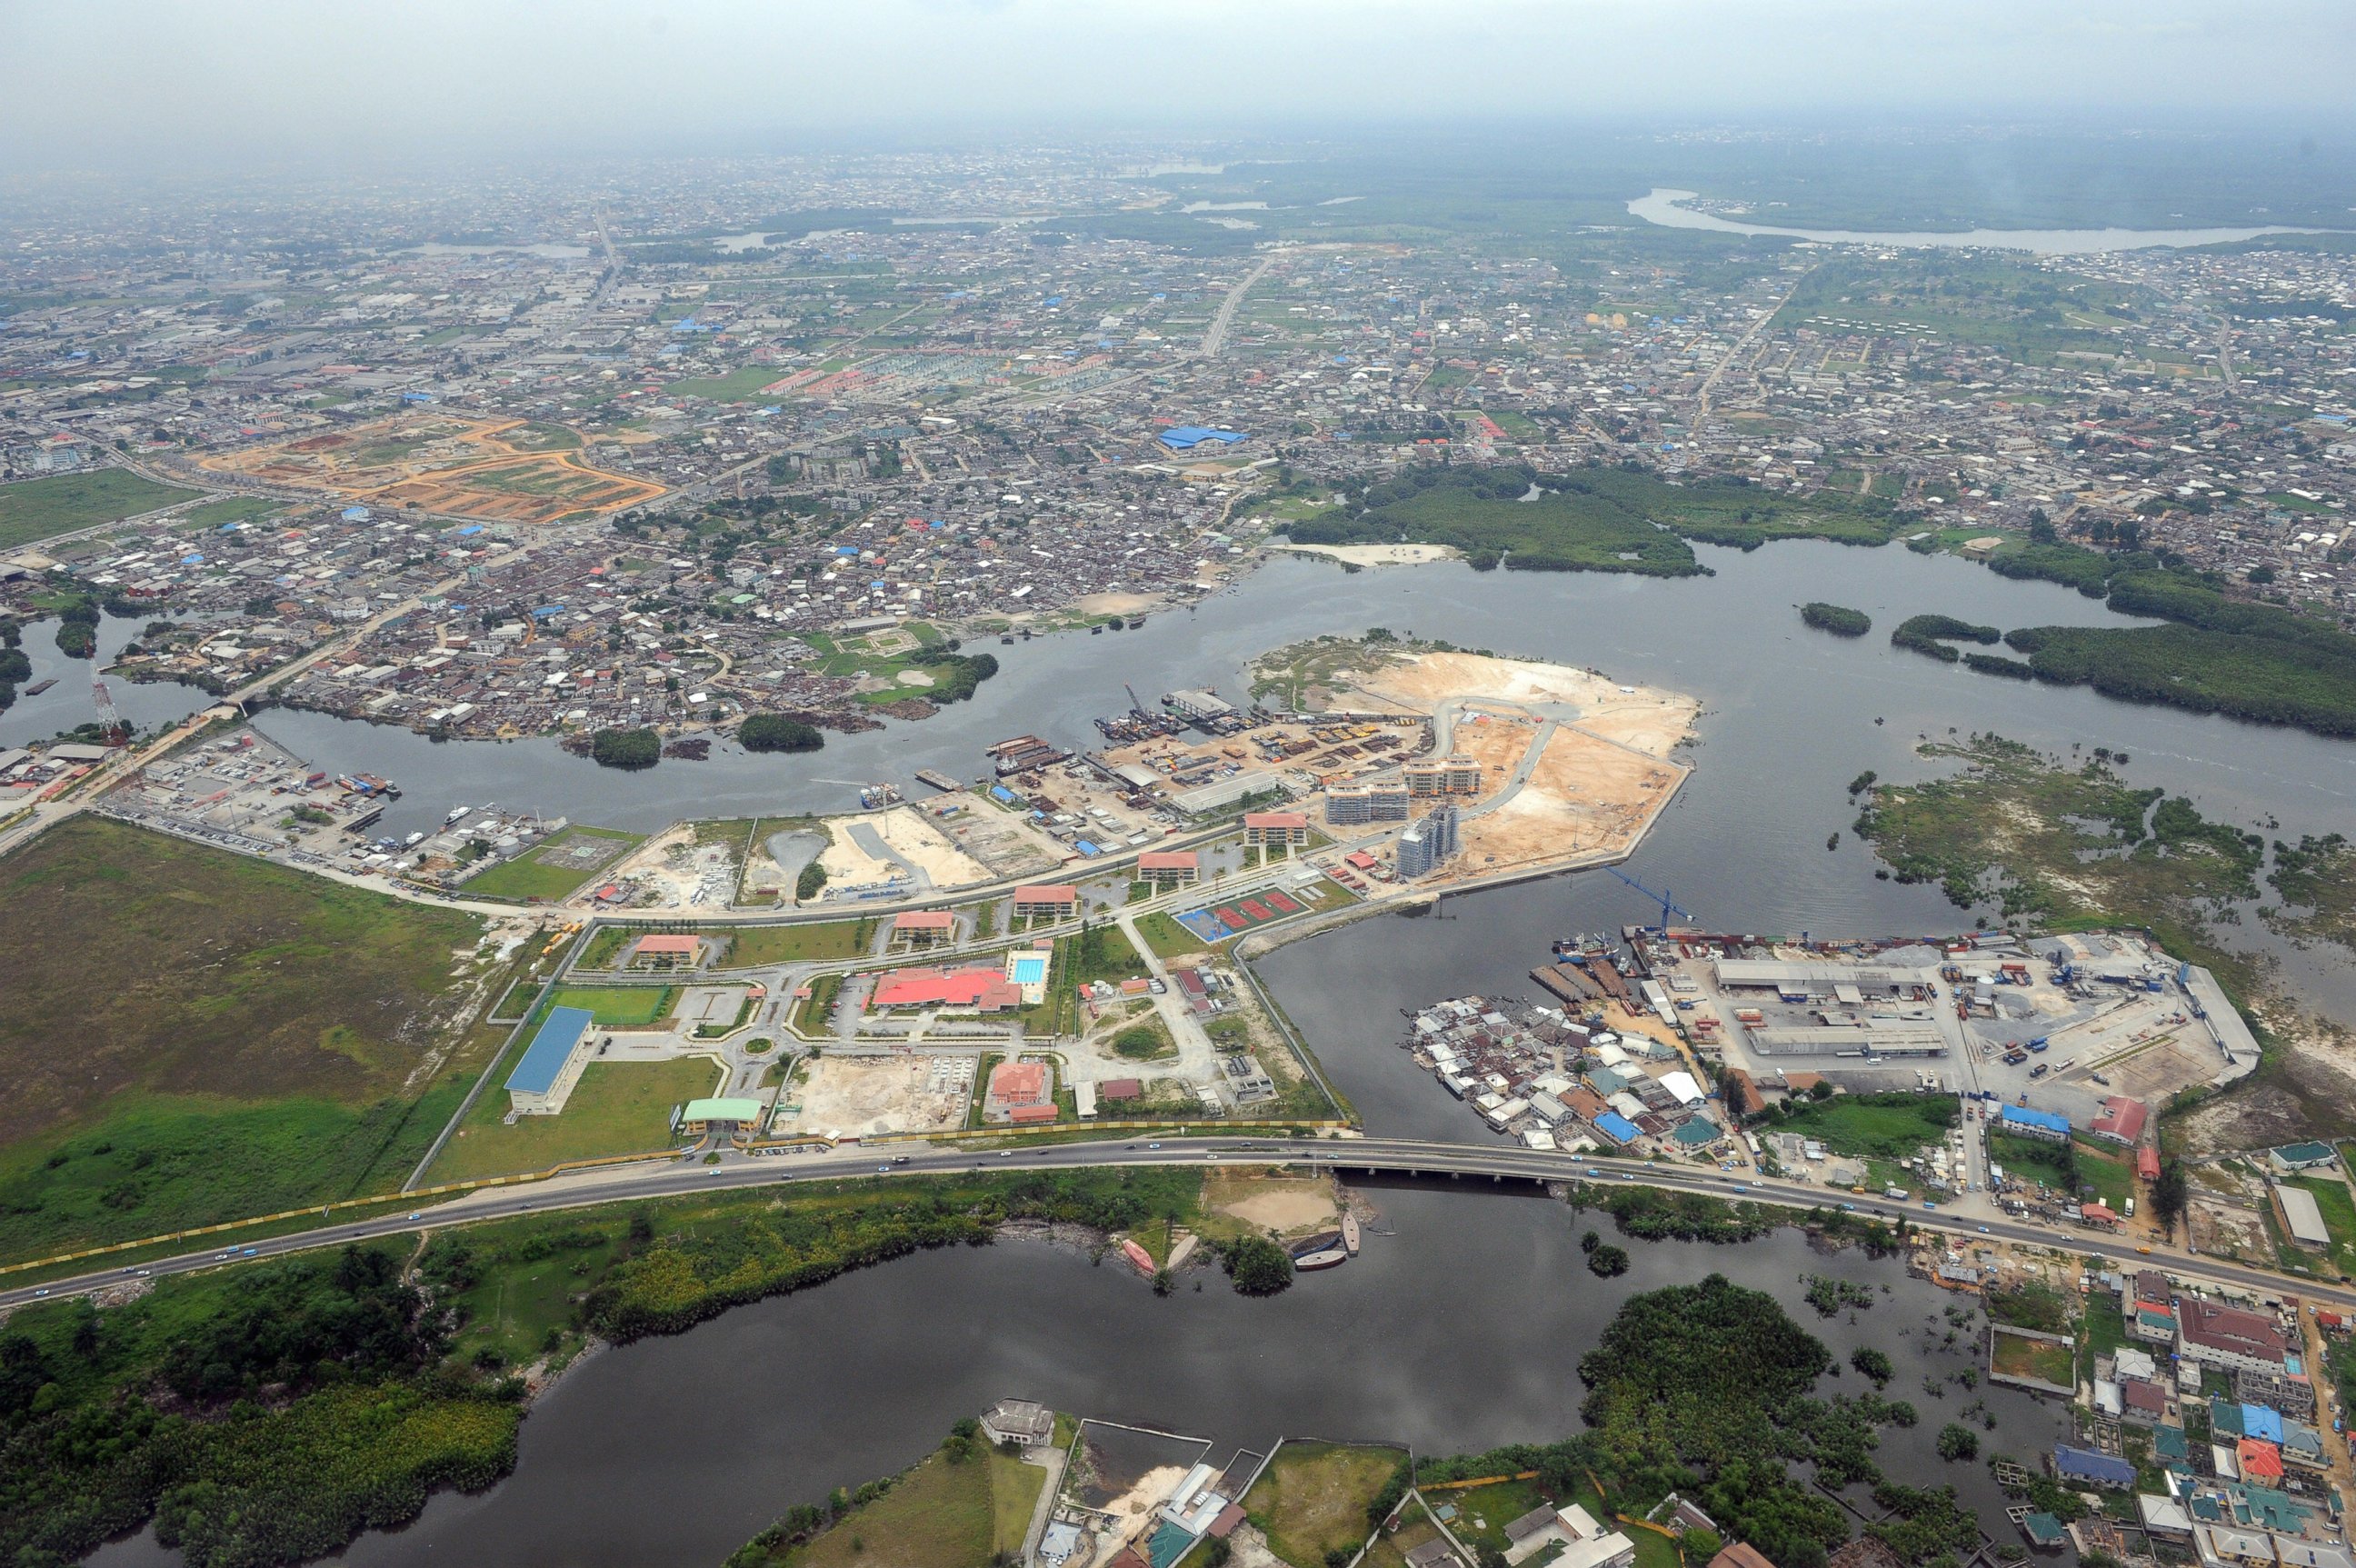 PHOTO: An aerial view of Port Harcourt in River State, the commercial capital Niger Delta